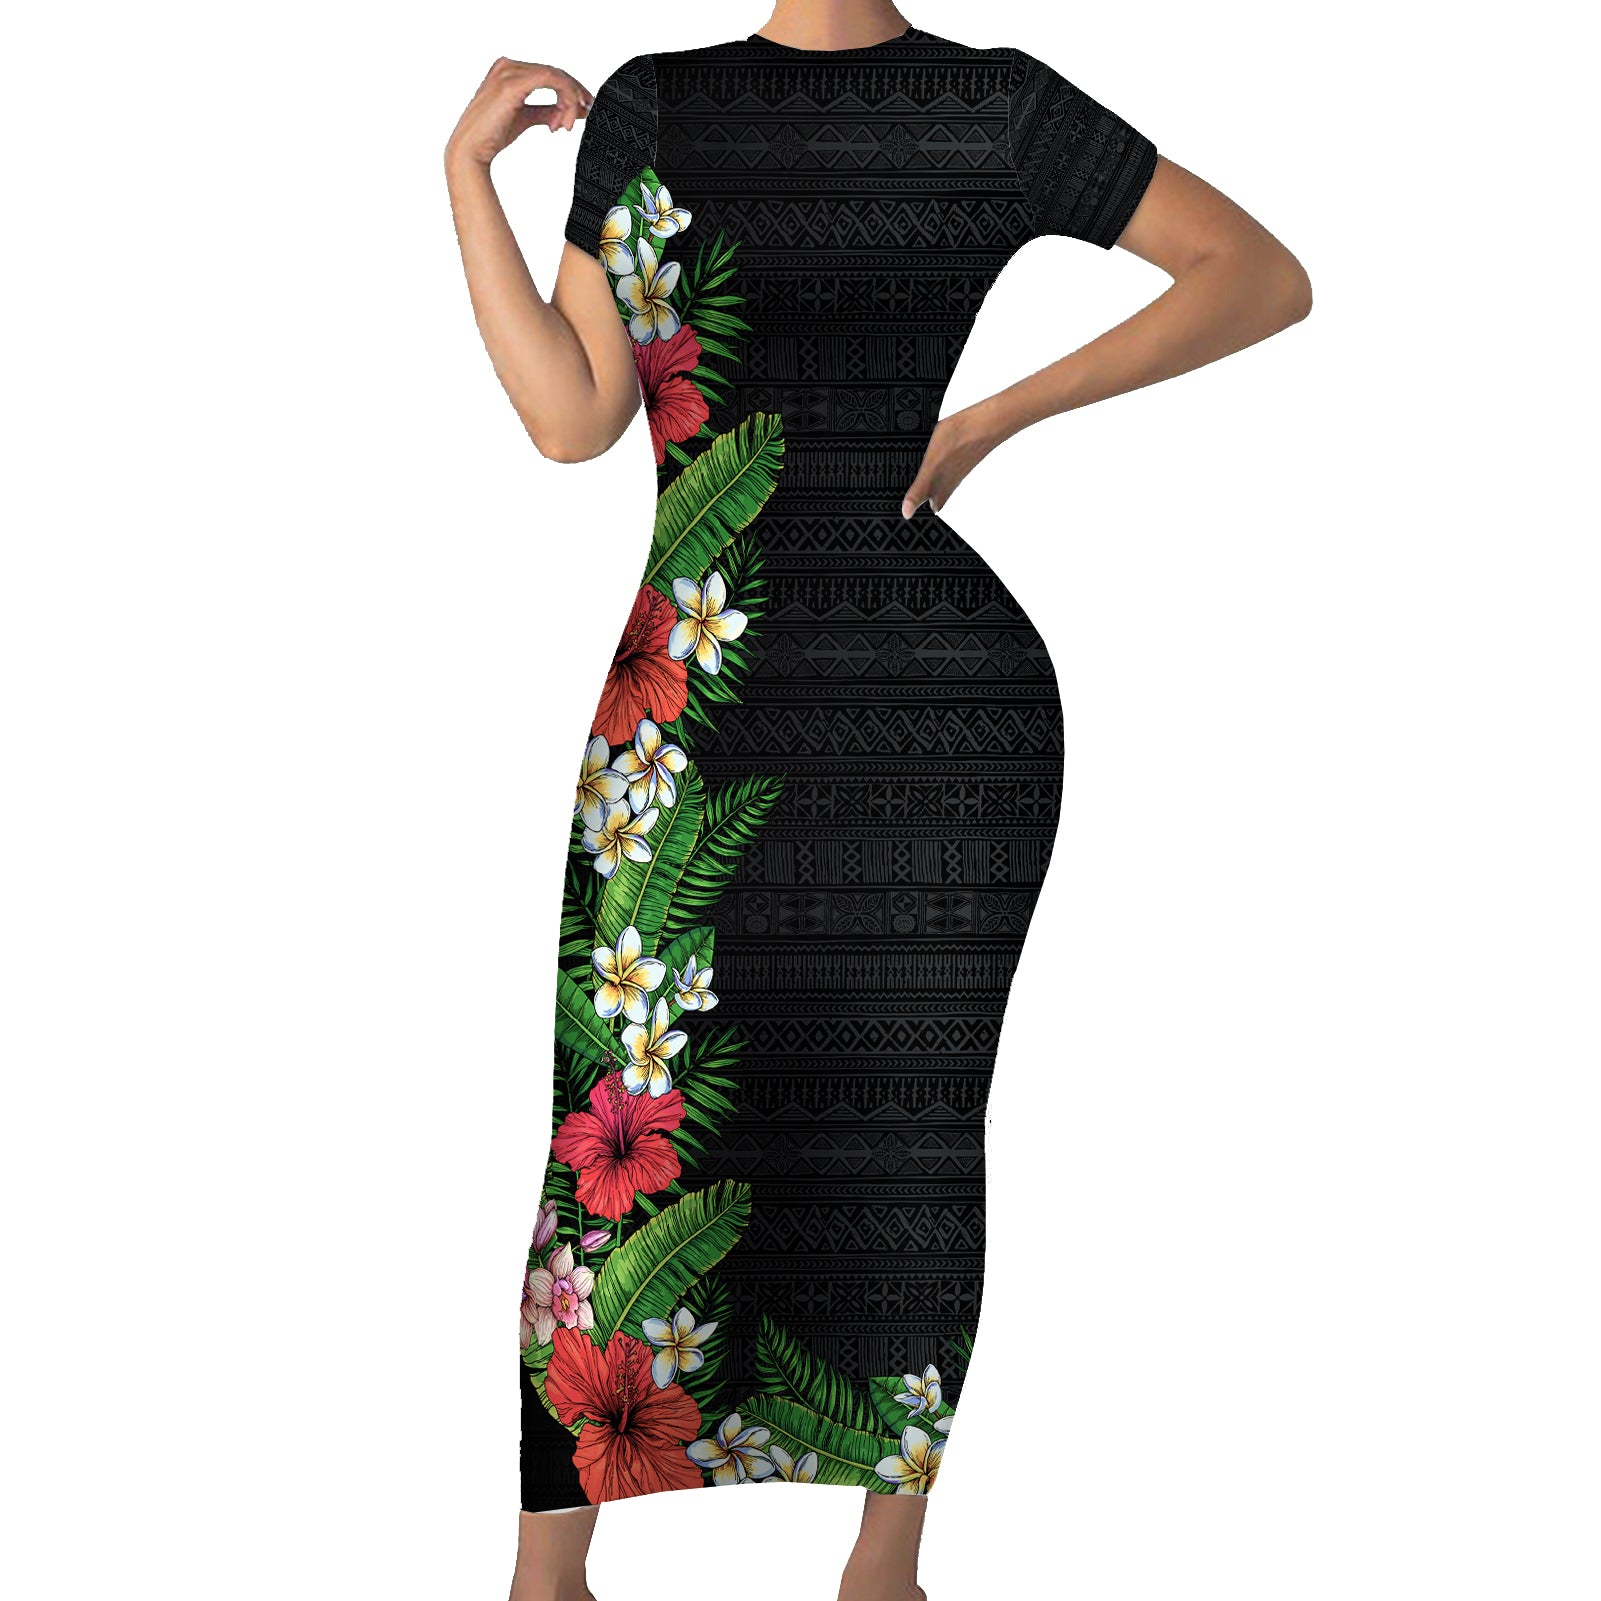 Hawaii Tropical Flowers and Leaves Short Sleeve Bodycon Dress Tapa Pattern Colorful Mode